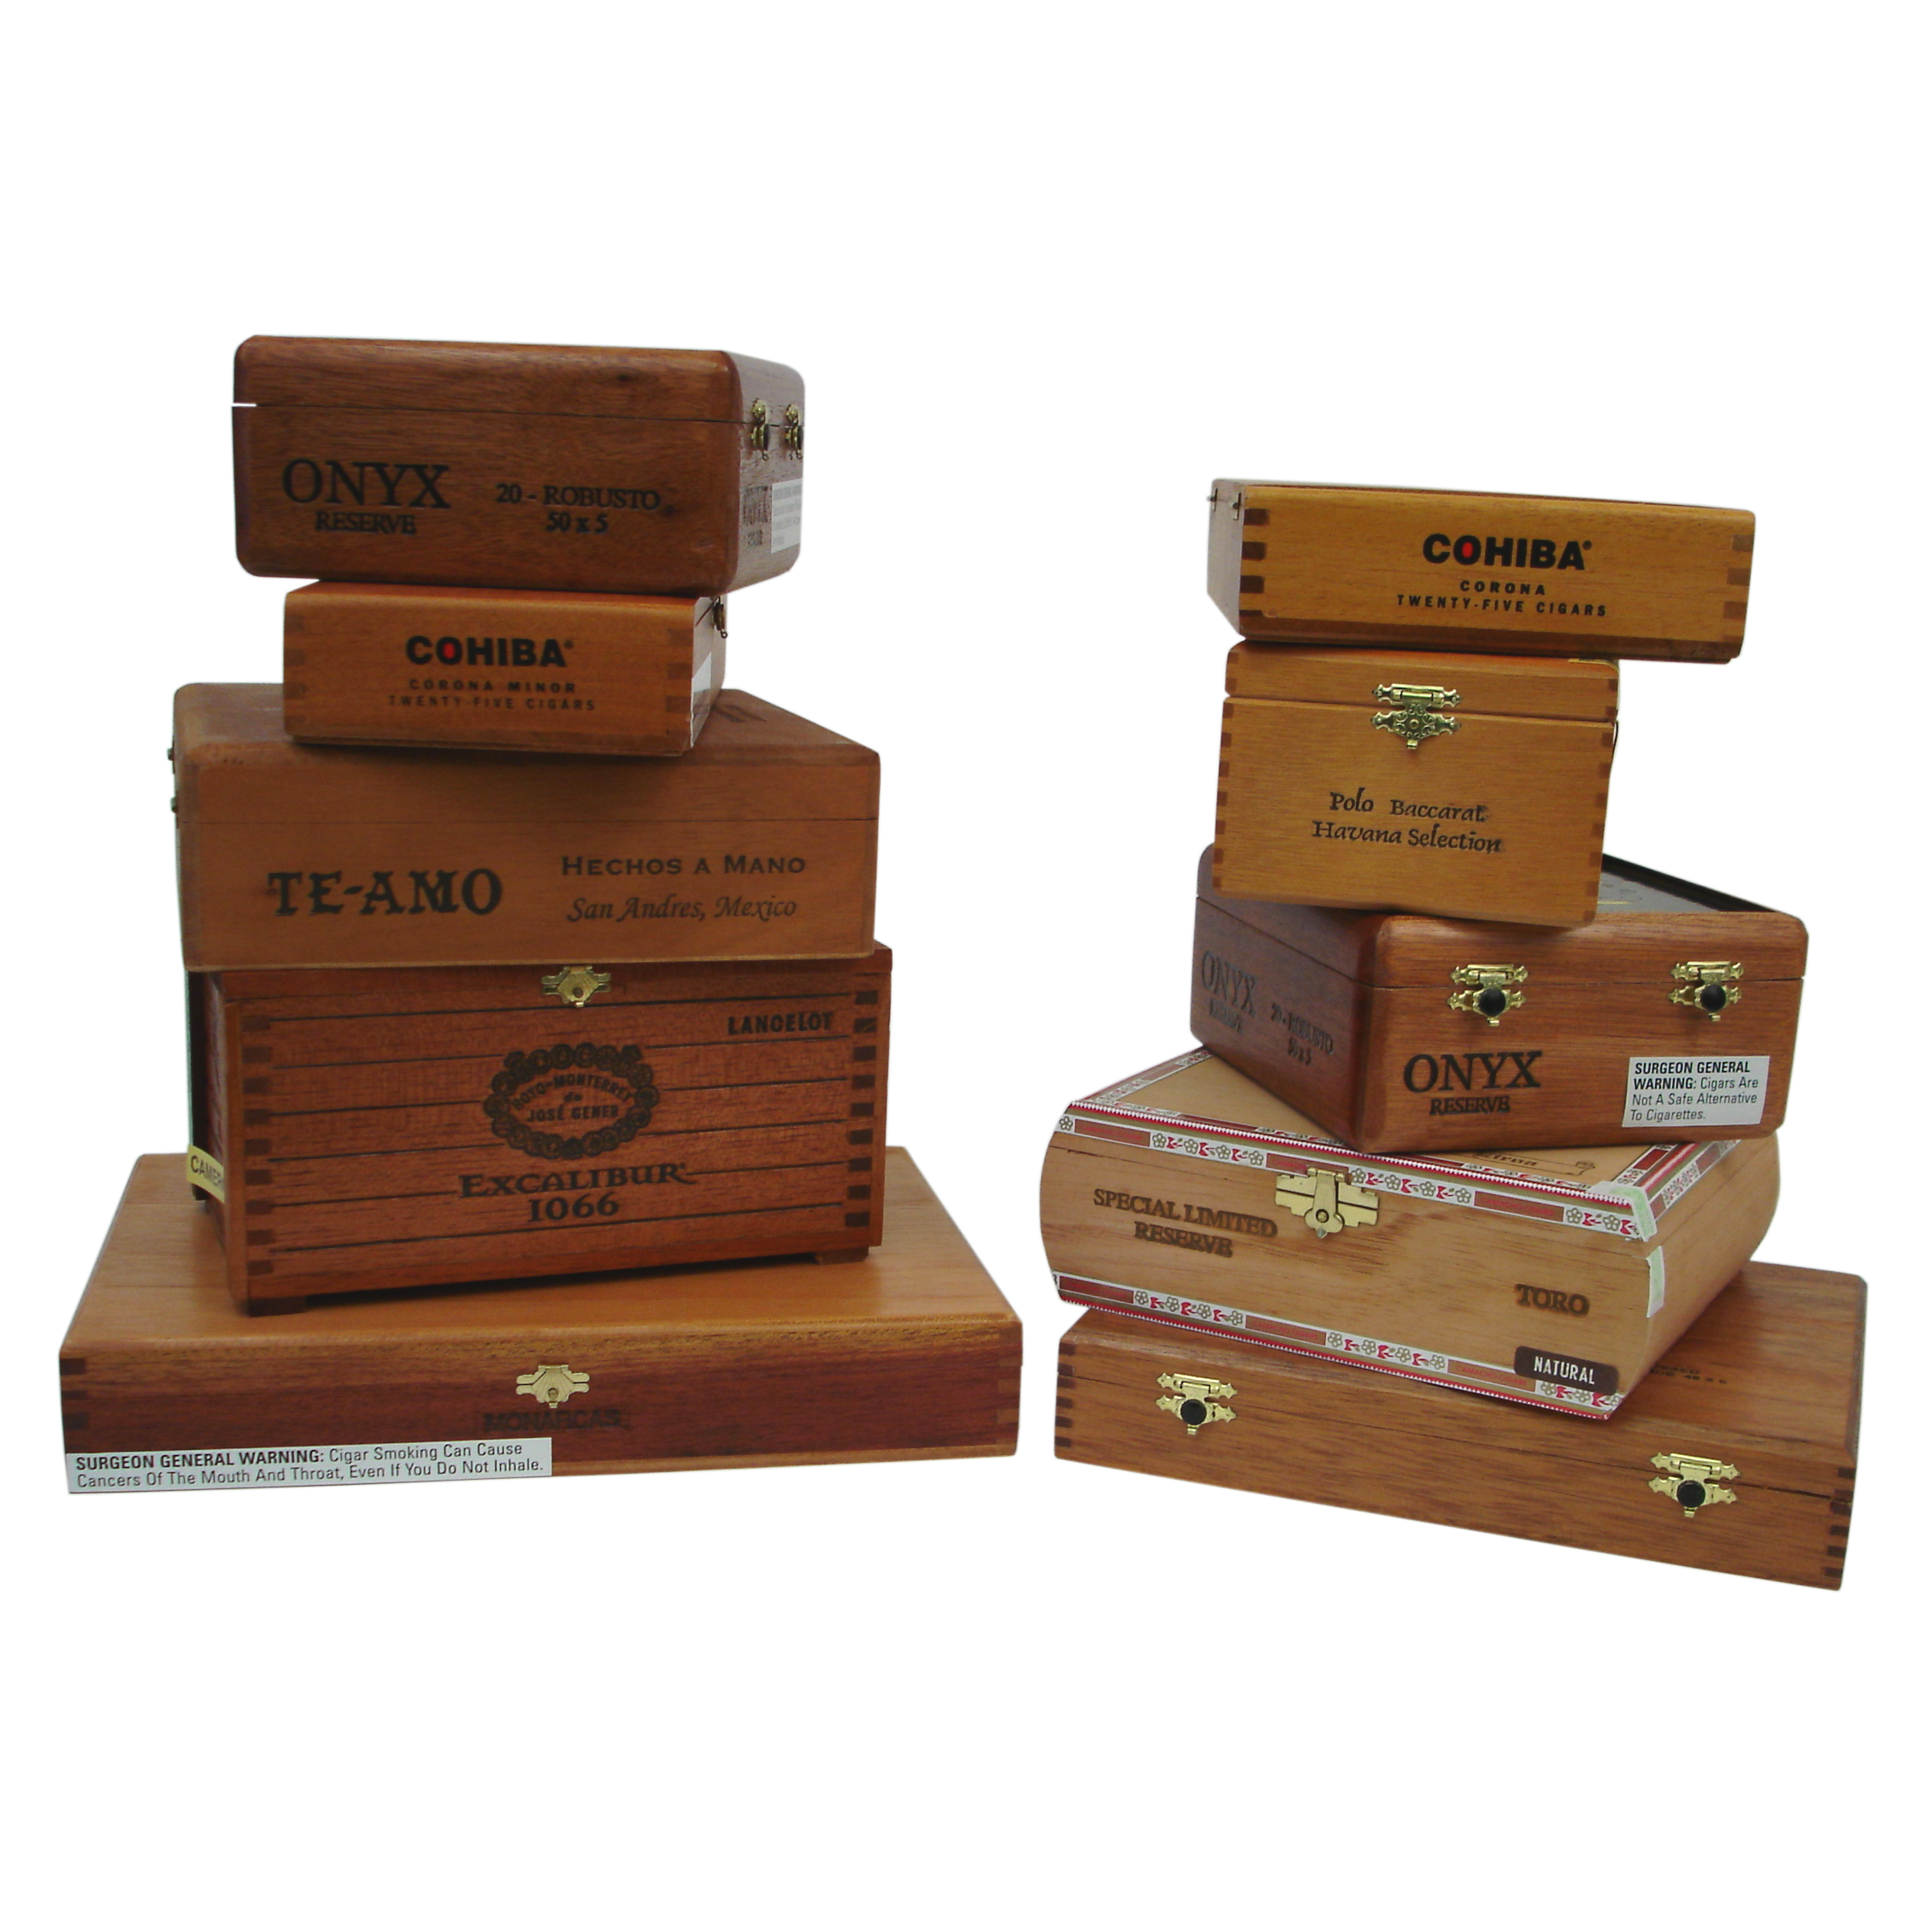 Wooden Empty Cigar Box, Pack of 10